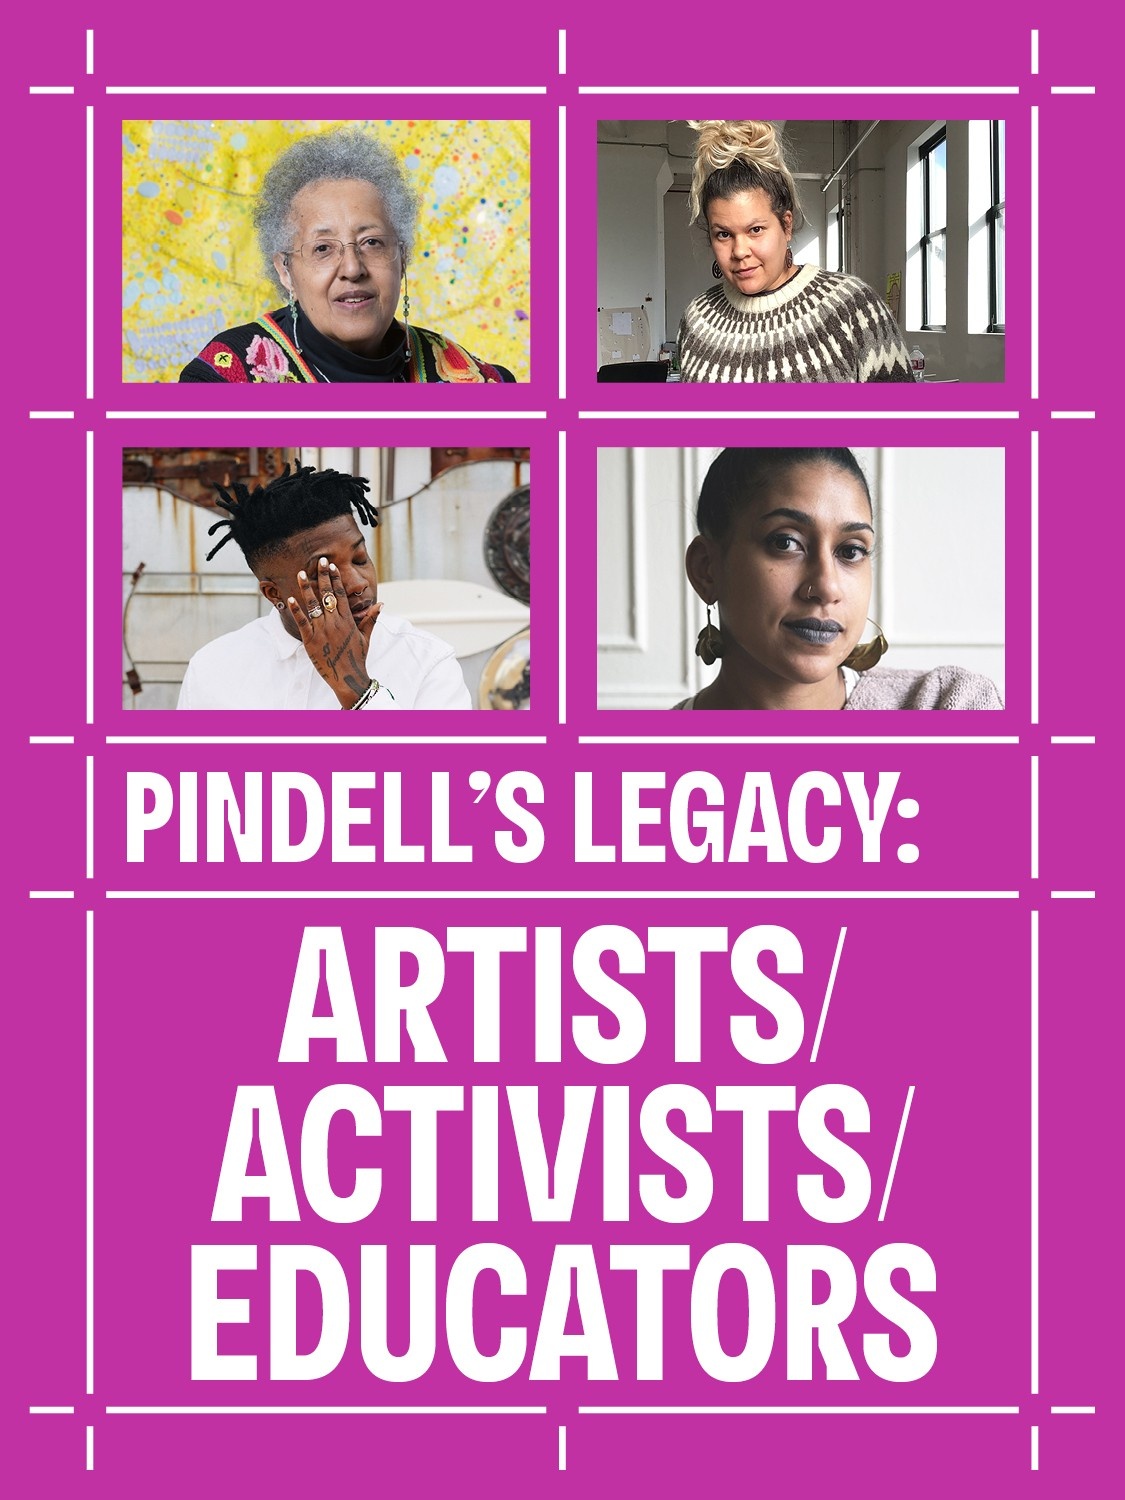 A white grid pattern on a pink background that encloses the photos of the four participants in Pindell's Legacy: Artists/Activists/Educators in a square formation; clockwise from top left: Howardena Pindell, Heather Hart, Shani Peters, Tiona Nekkia McClodden.